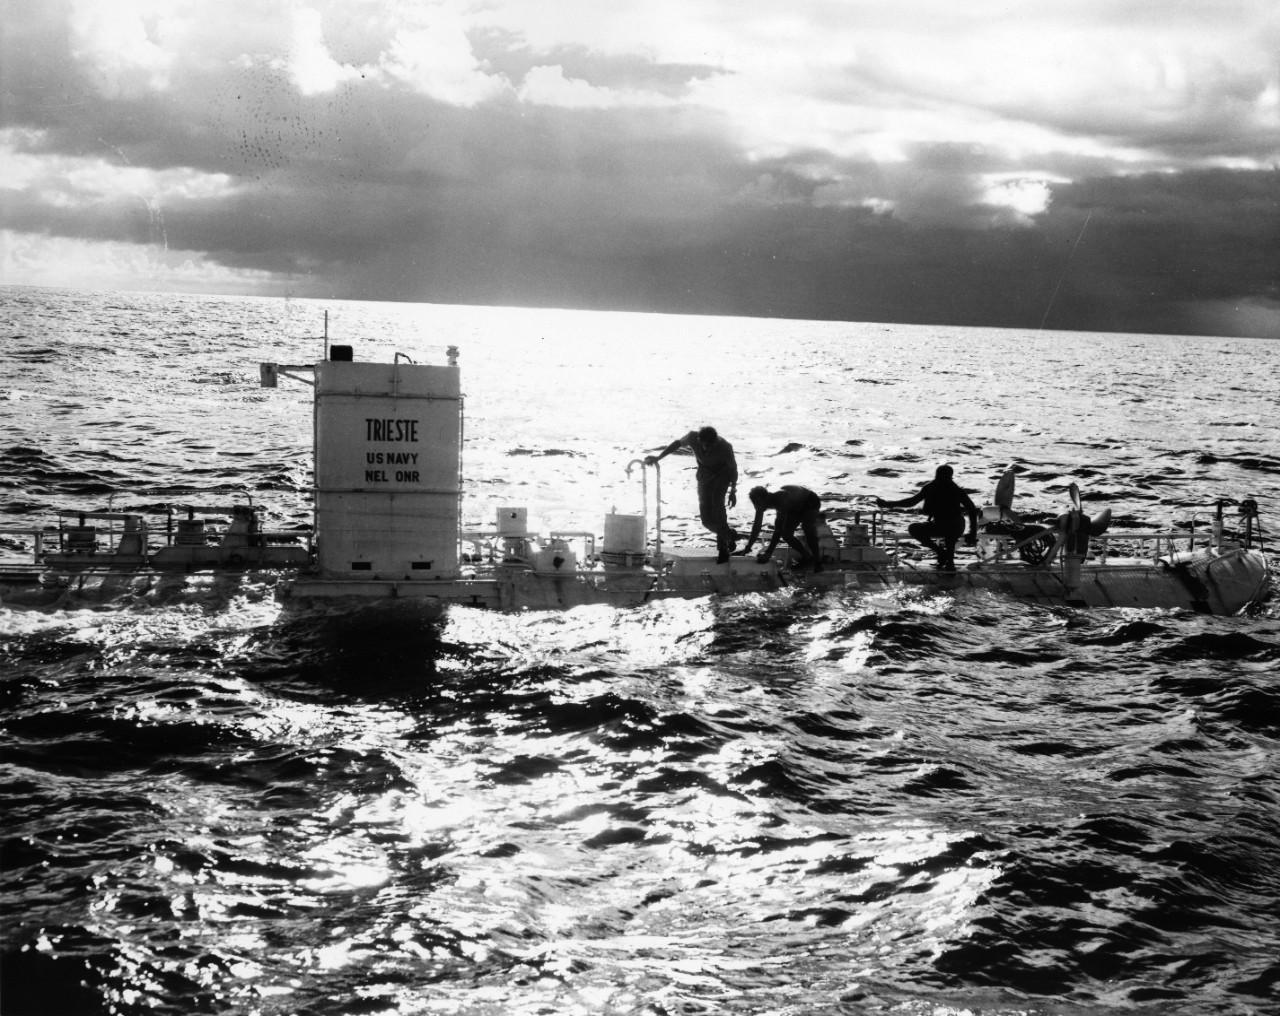 Jacques Piccard, Guiseppe Buono, and Ernest Vigil inspecting the Bathyscaphe Trieste after the first dive off the coast of Guam.